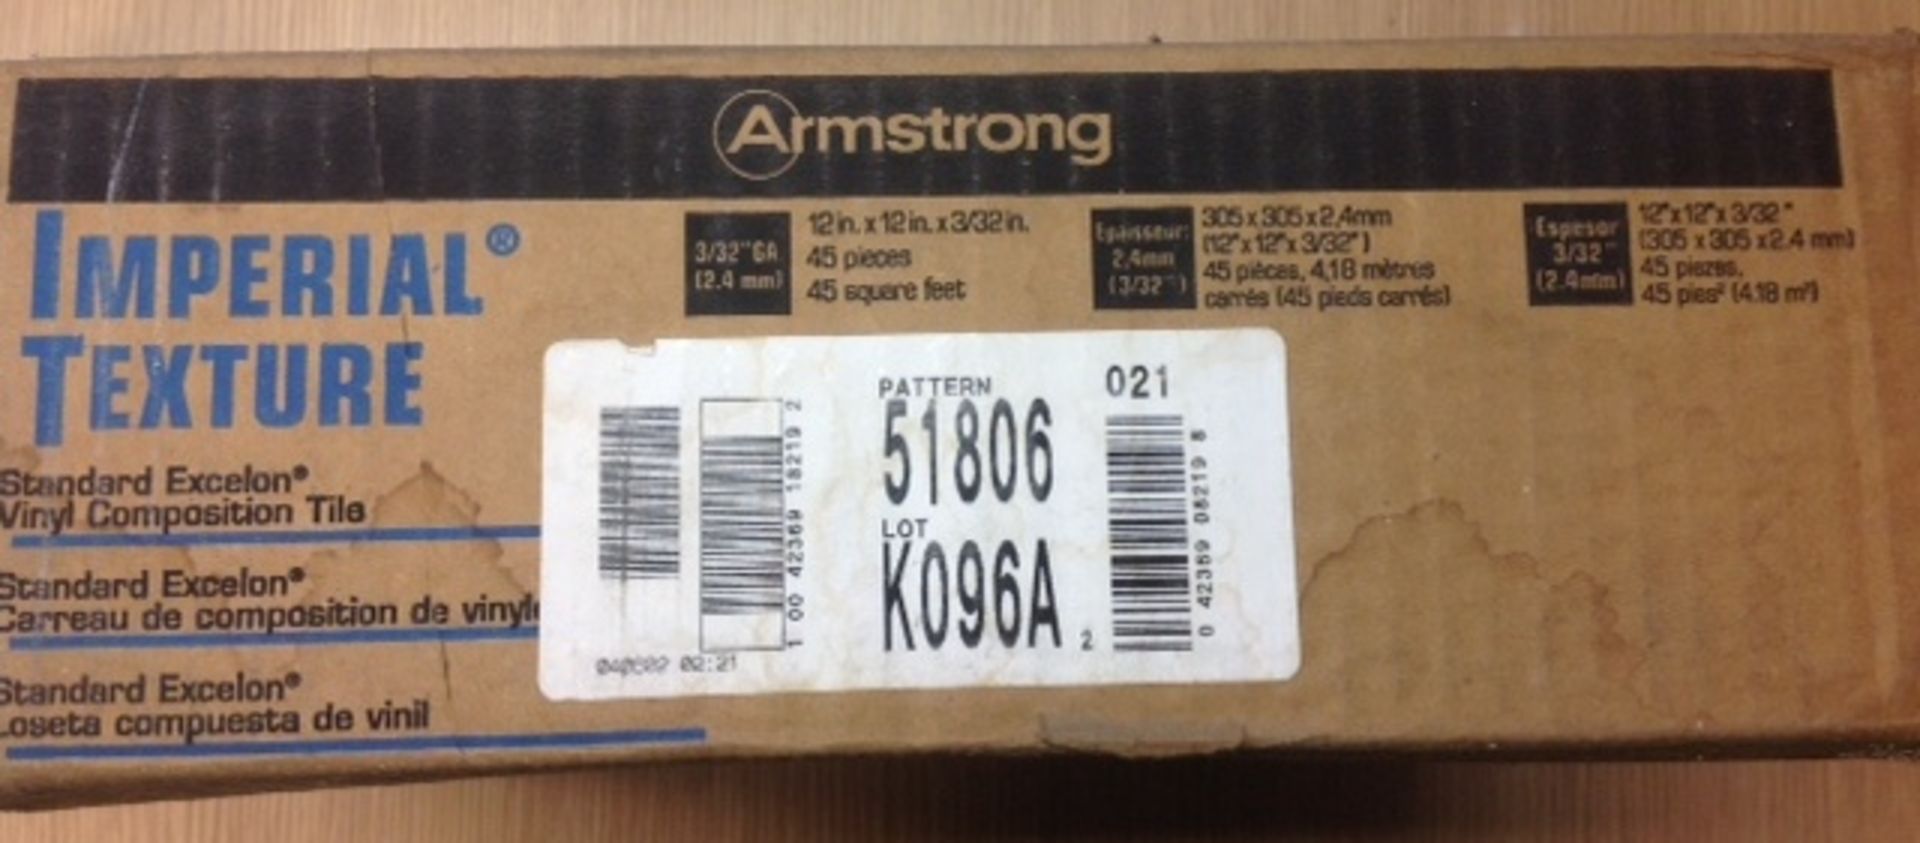 10 x Boxes of Armstrong vinyl floor tiles - 45 tiles per box = 45 sq ft - Image 2 of 4